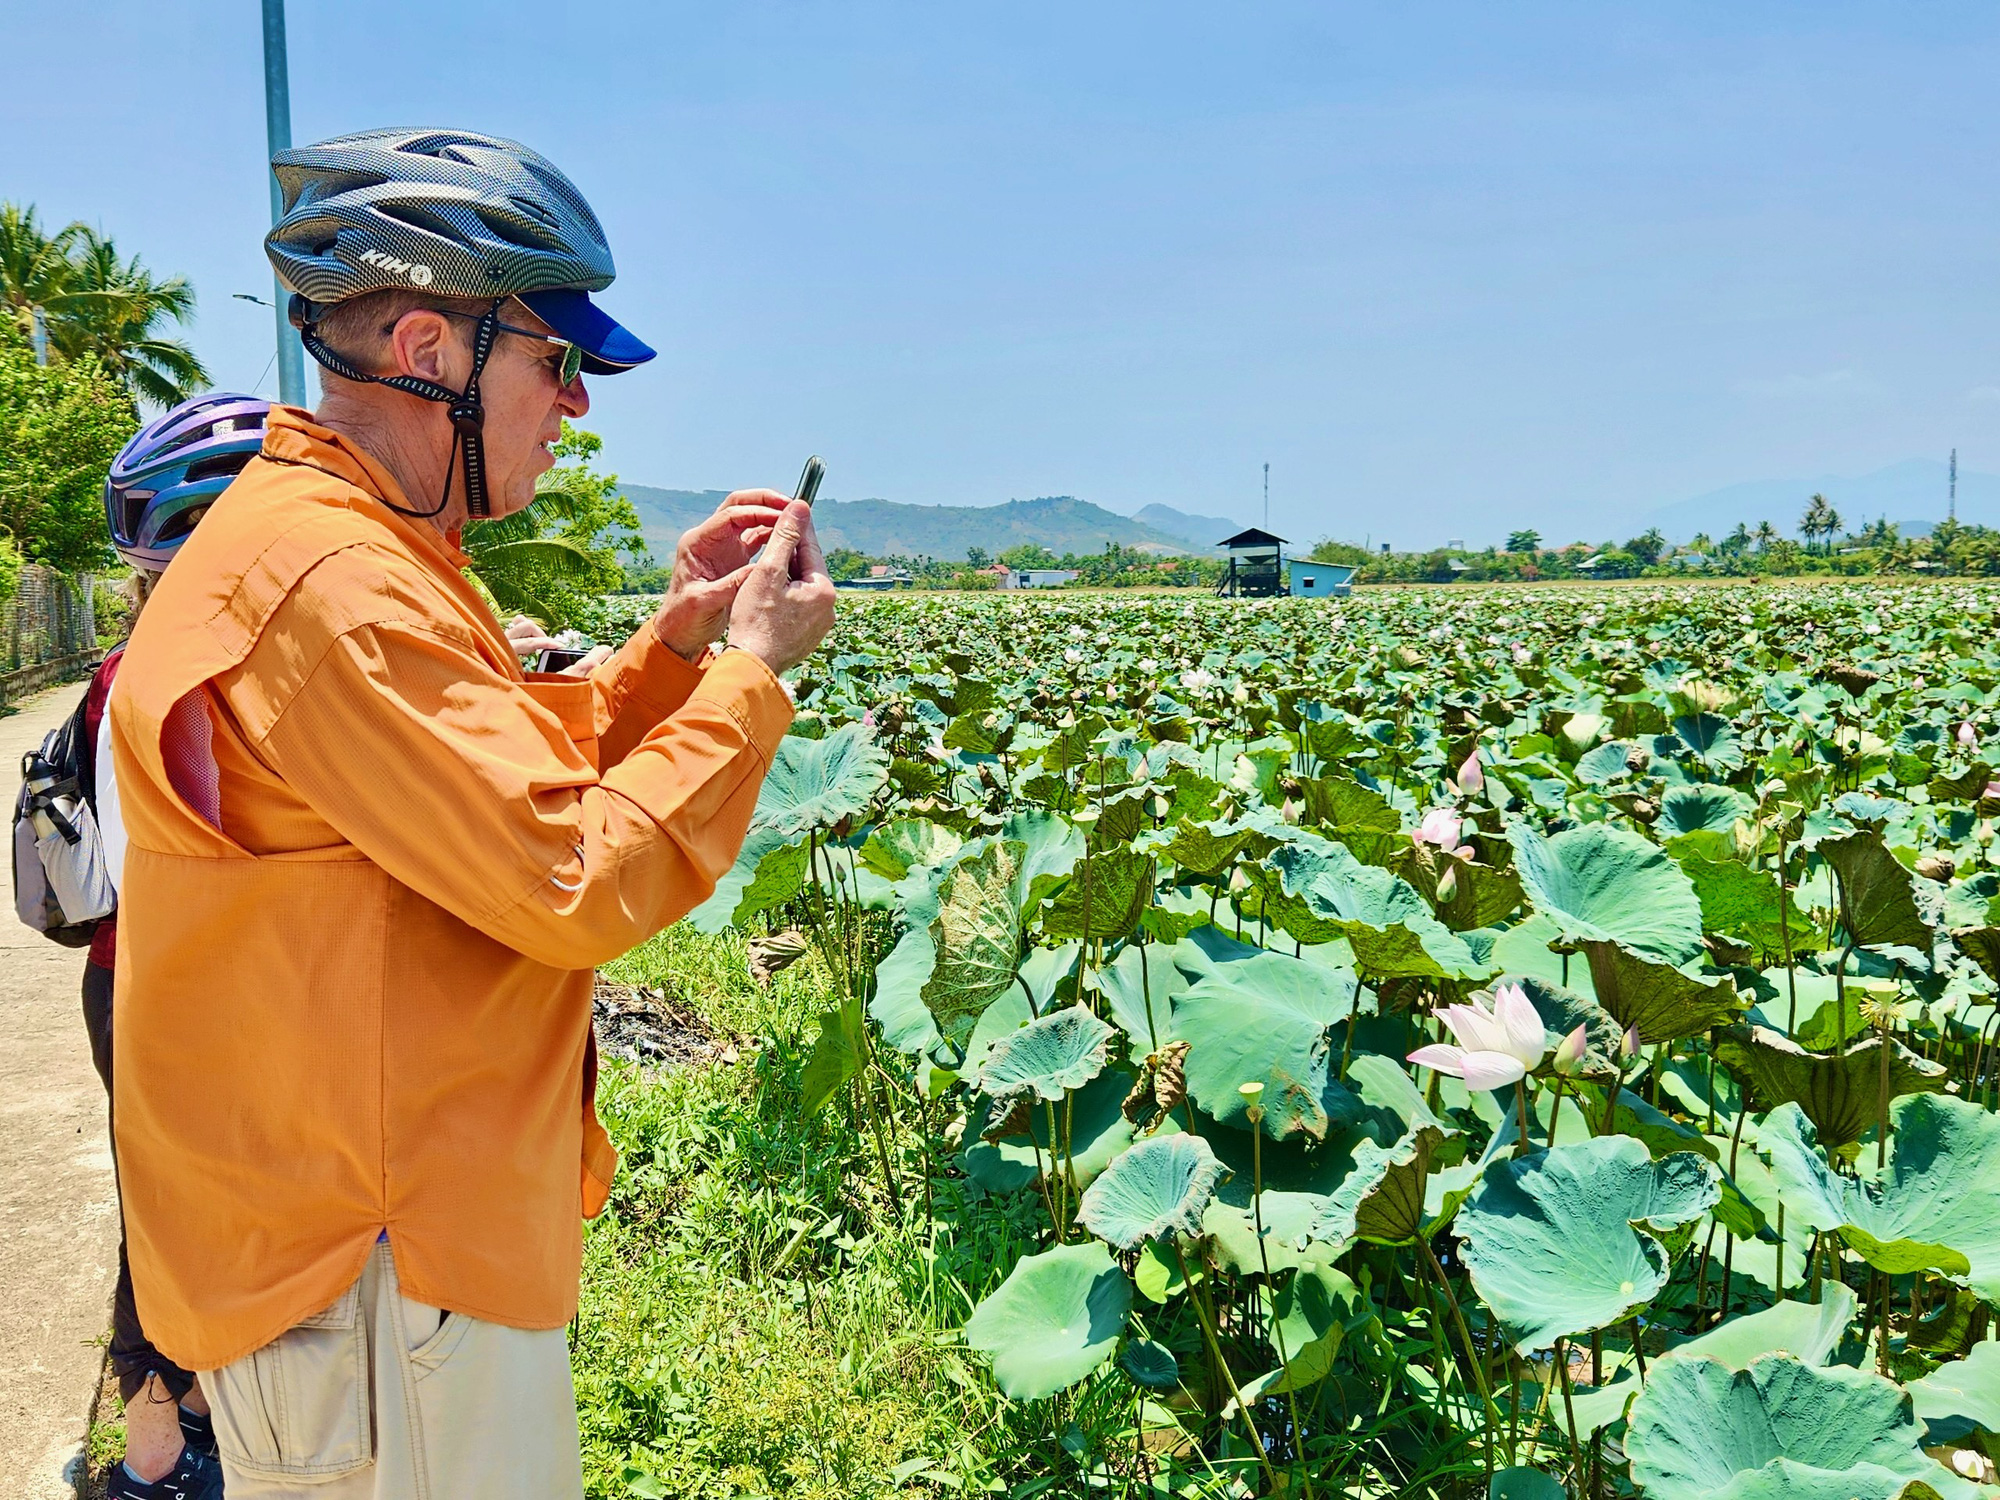 A foreign tourist takes photos of a lotus pond in Nha Trang City, Khanh Hoa Province, south-central Vietnam. Photo: Minh Chien / Tuoi Tre